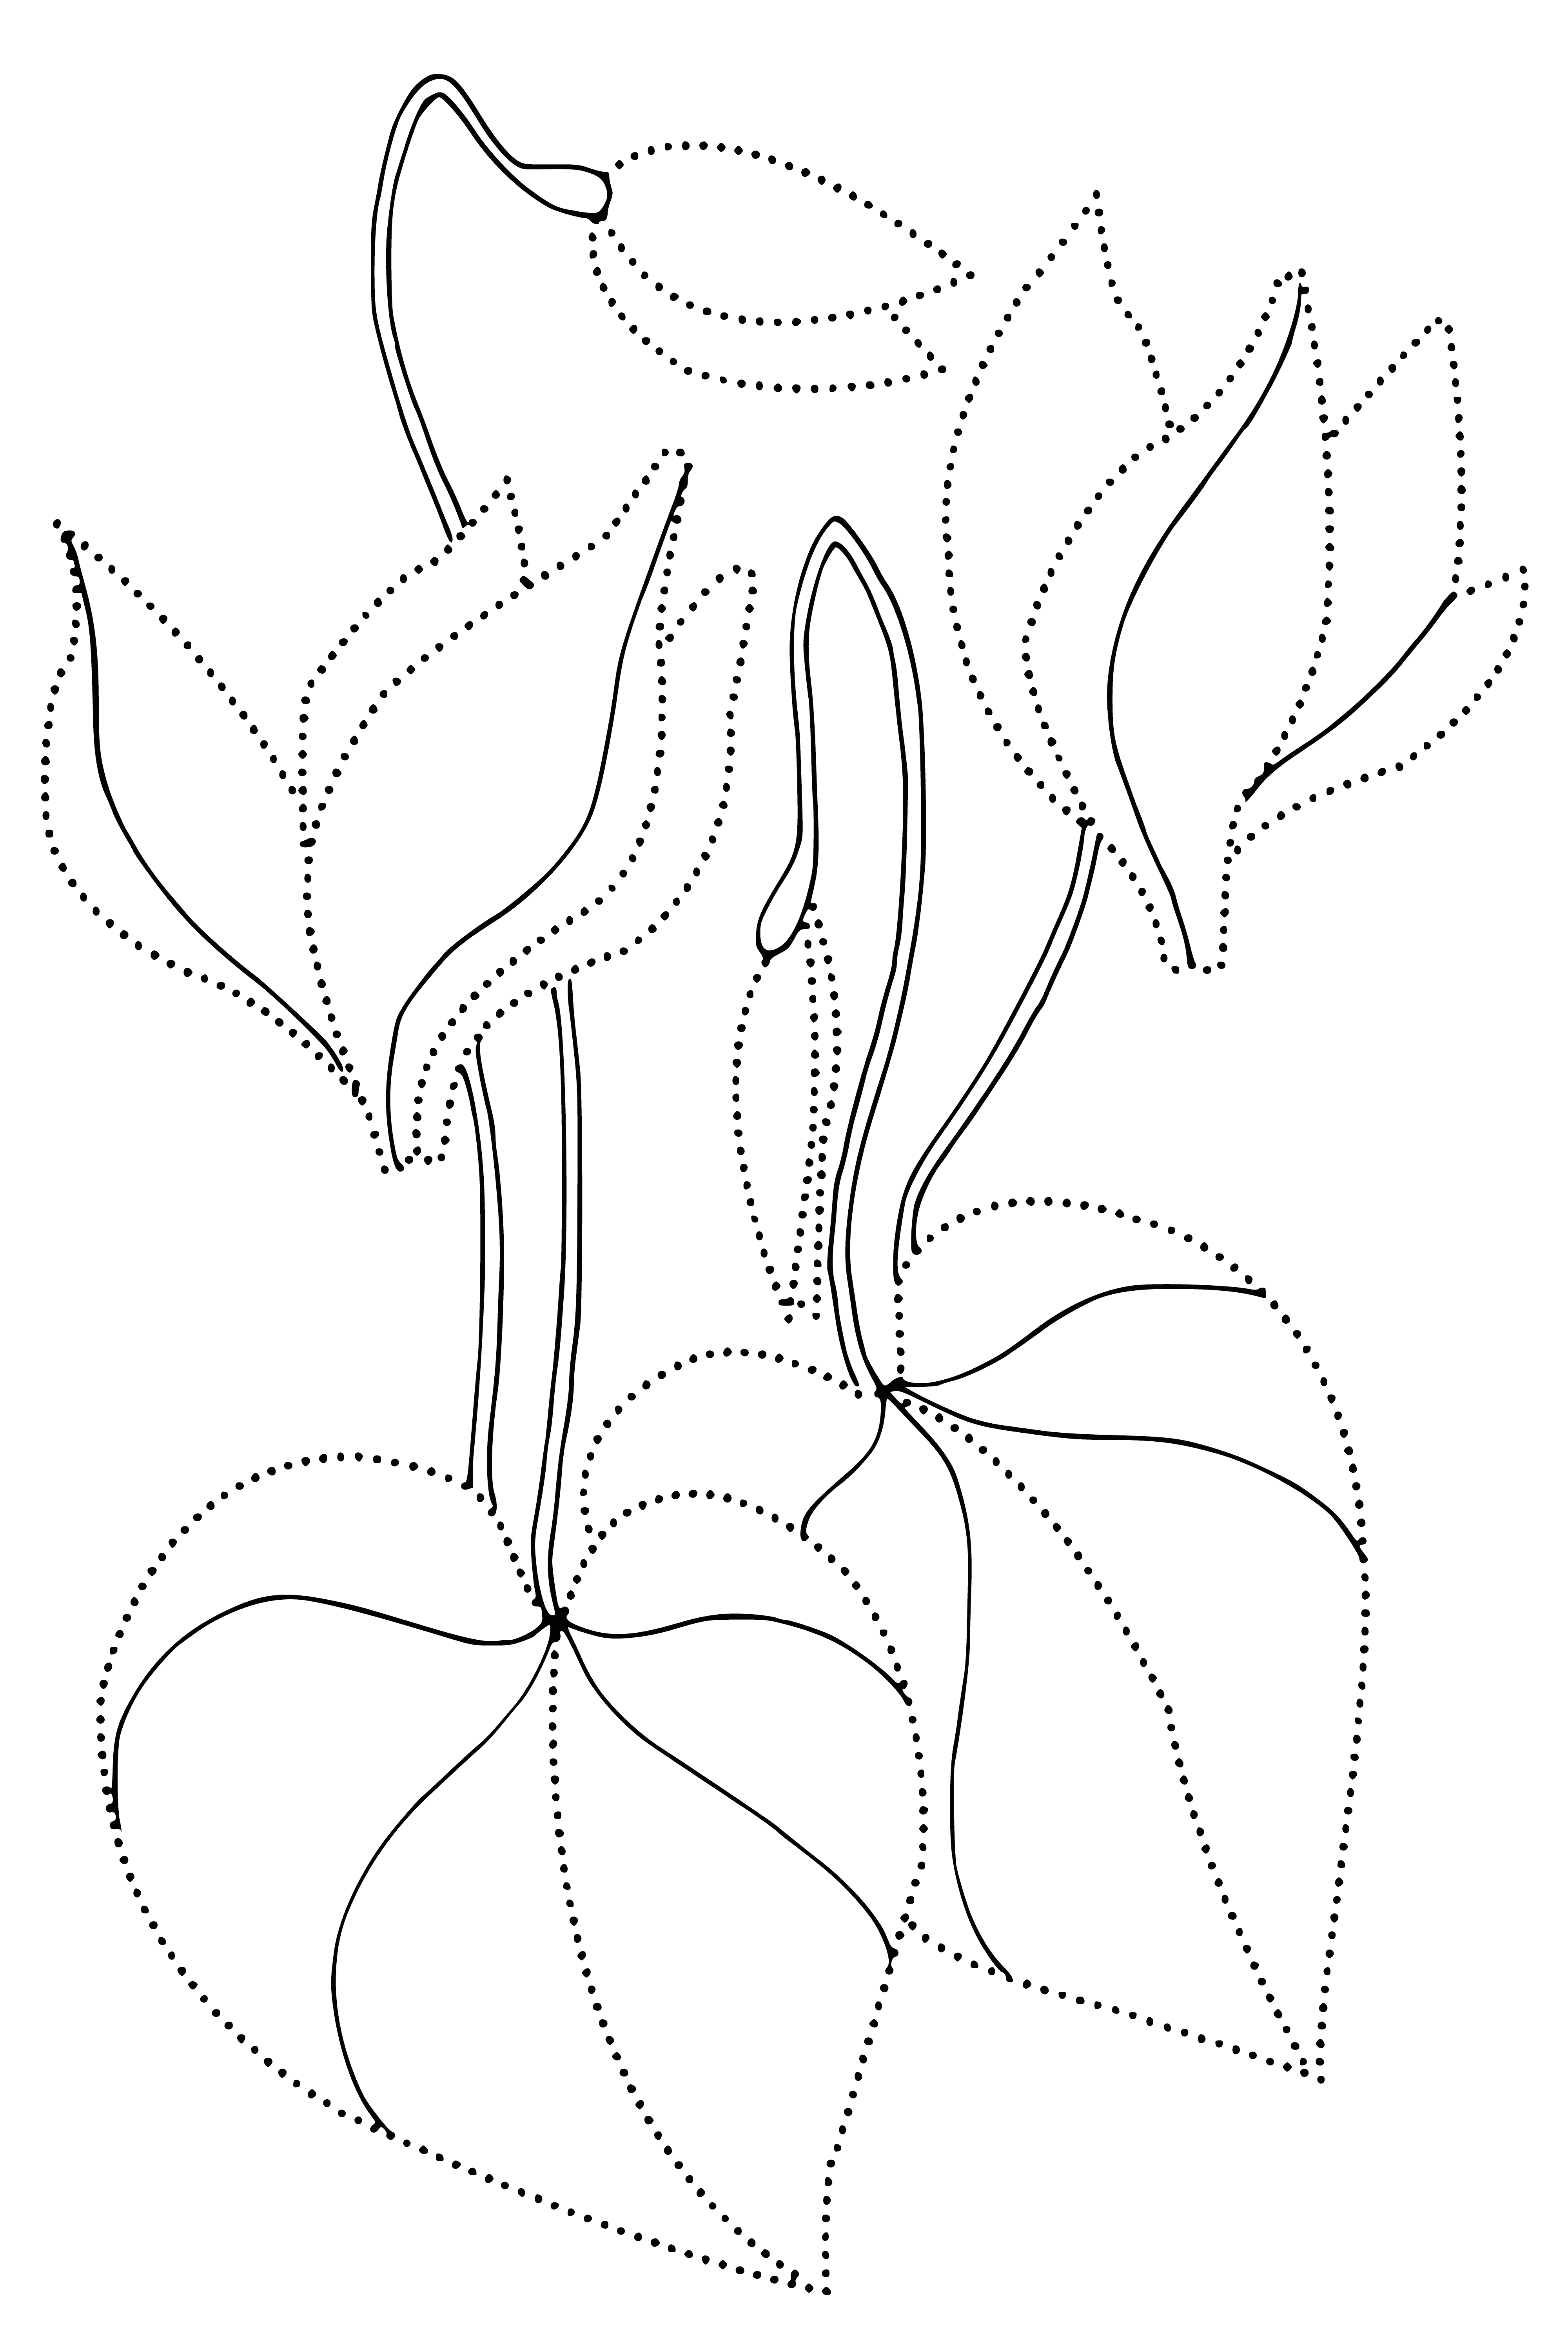 coloring page: Water lilies bloom floating flowers with white petals & yellow centres, plus floating leaves.